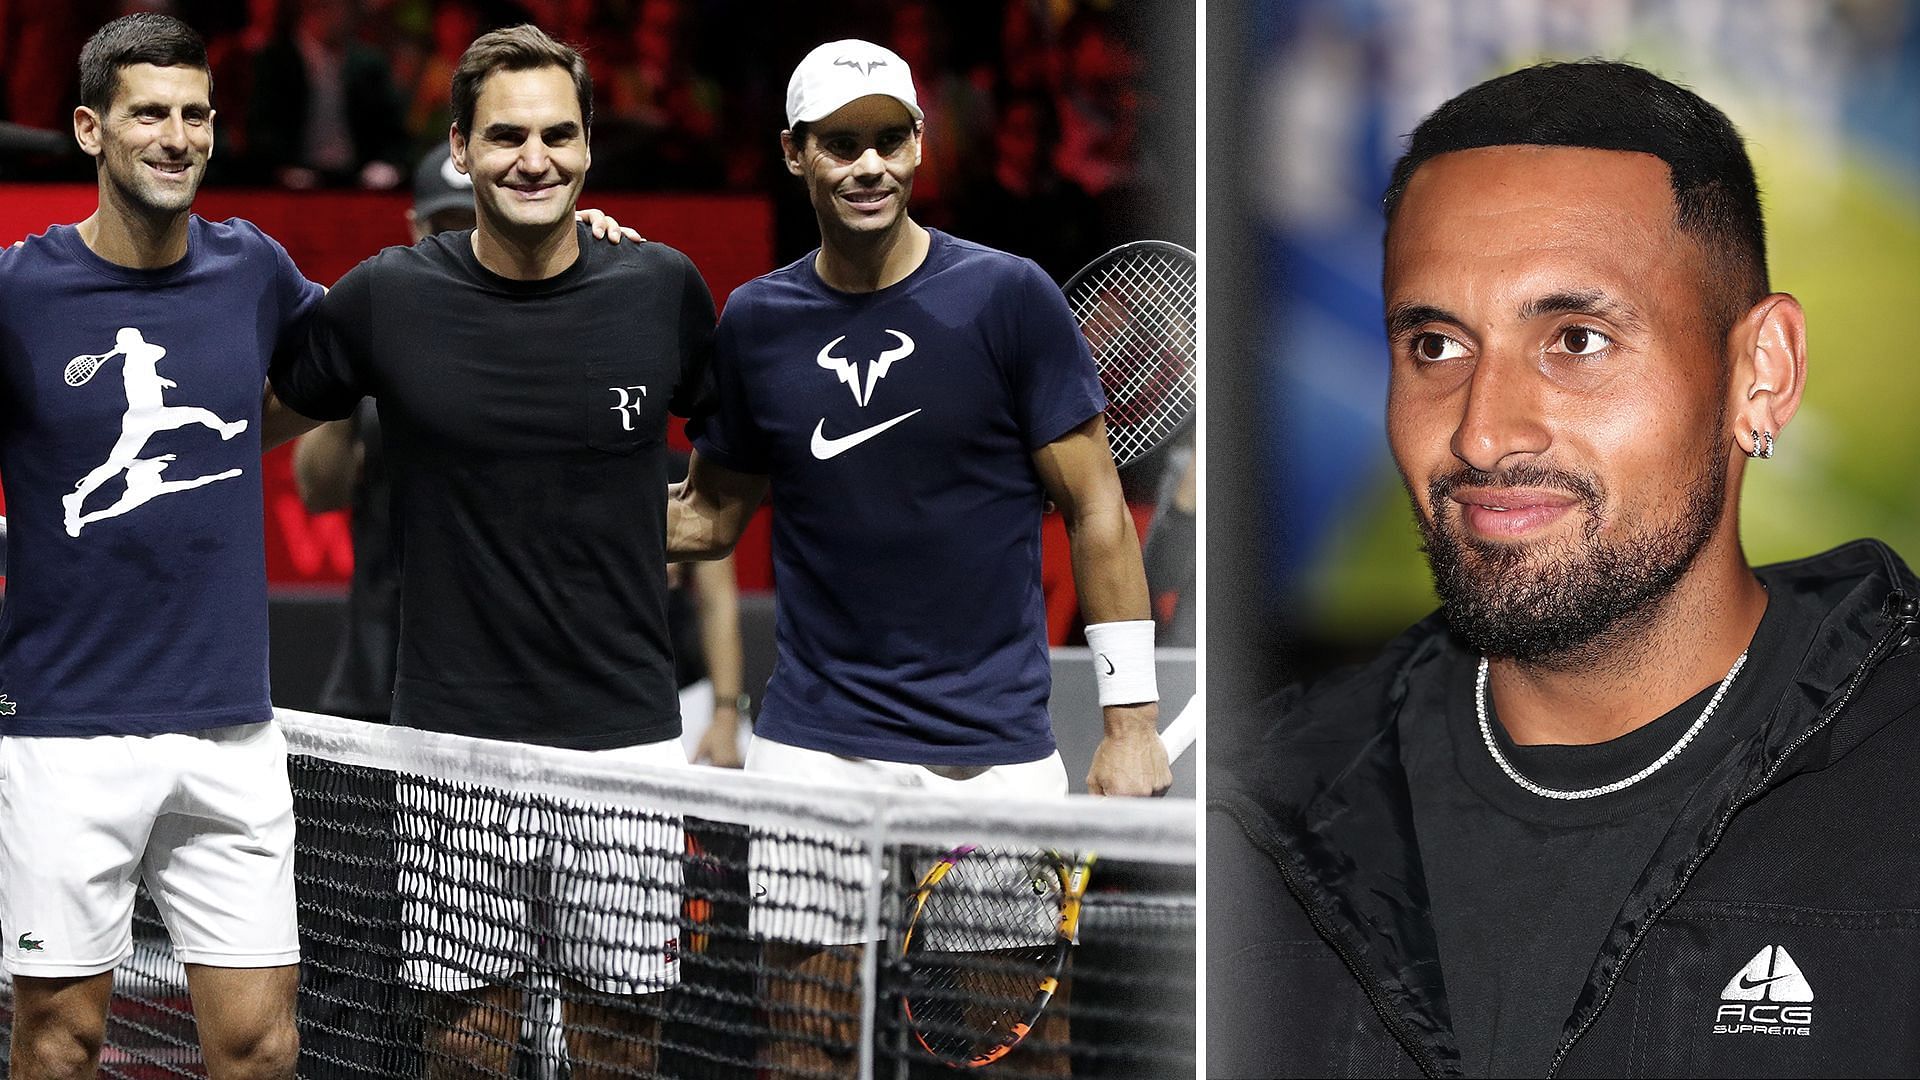 Nick Kyrgios opens up on his relationship with the Big Three.